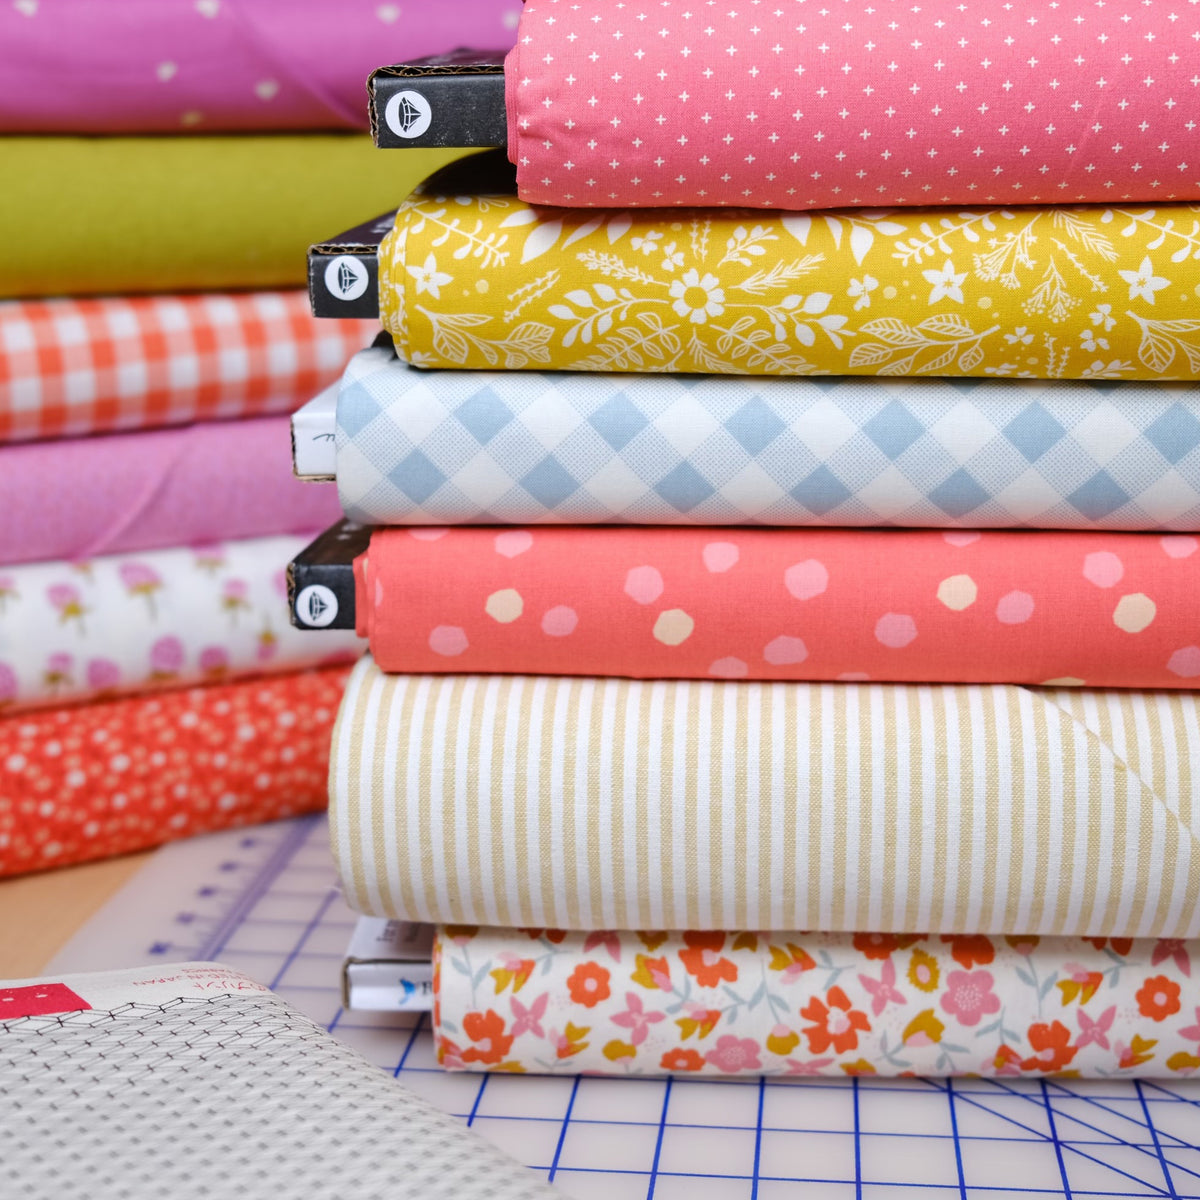 Quilt Fabric for Quilting from Splendid Speck